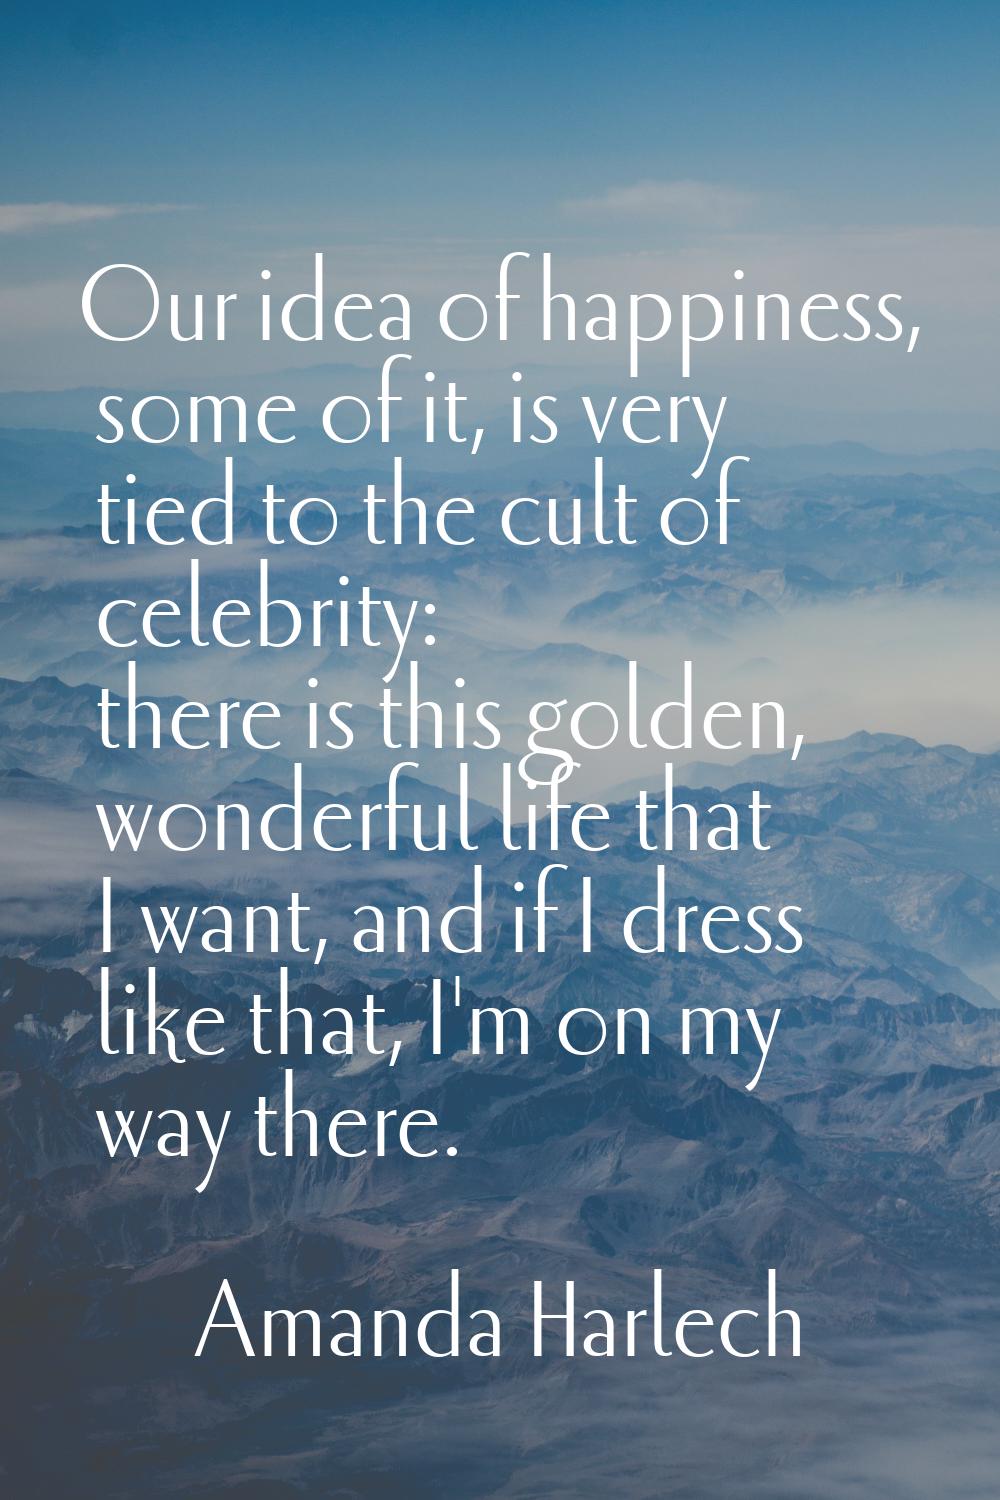 Our idea of happiness, some of it, is very tied to the cult of celebrity: there is this golden, won